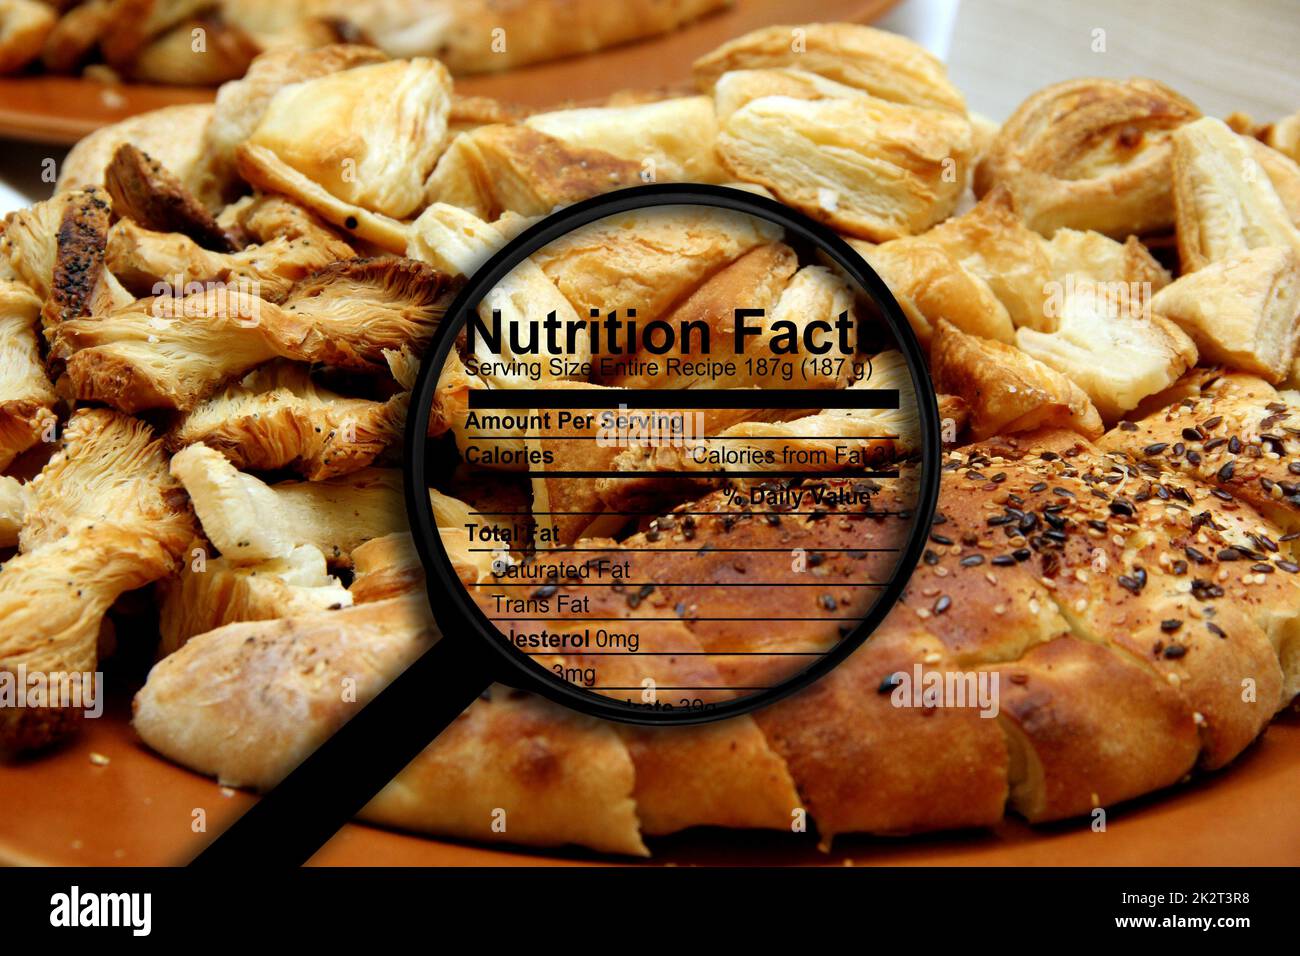 Nutrition facts on bread Stock Photo